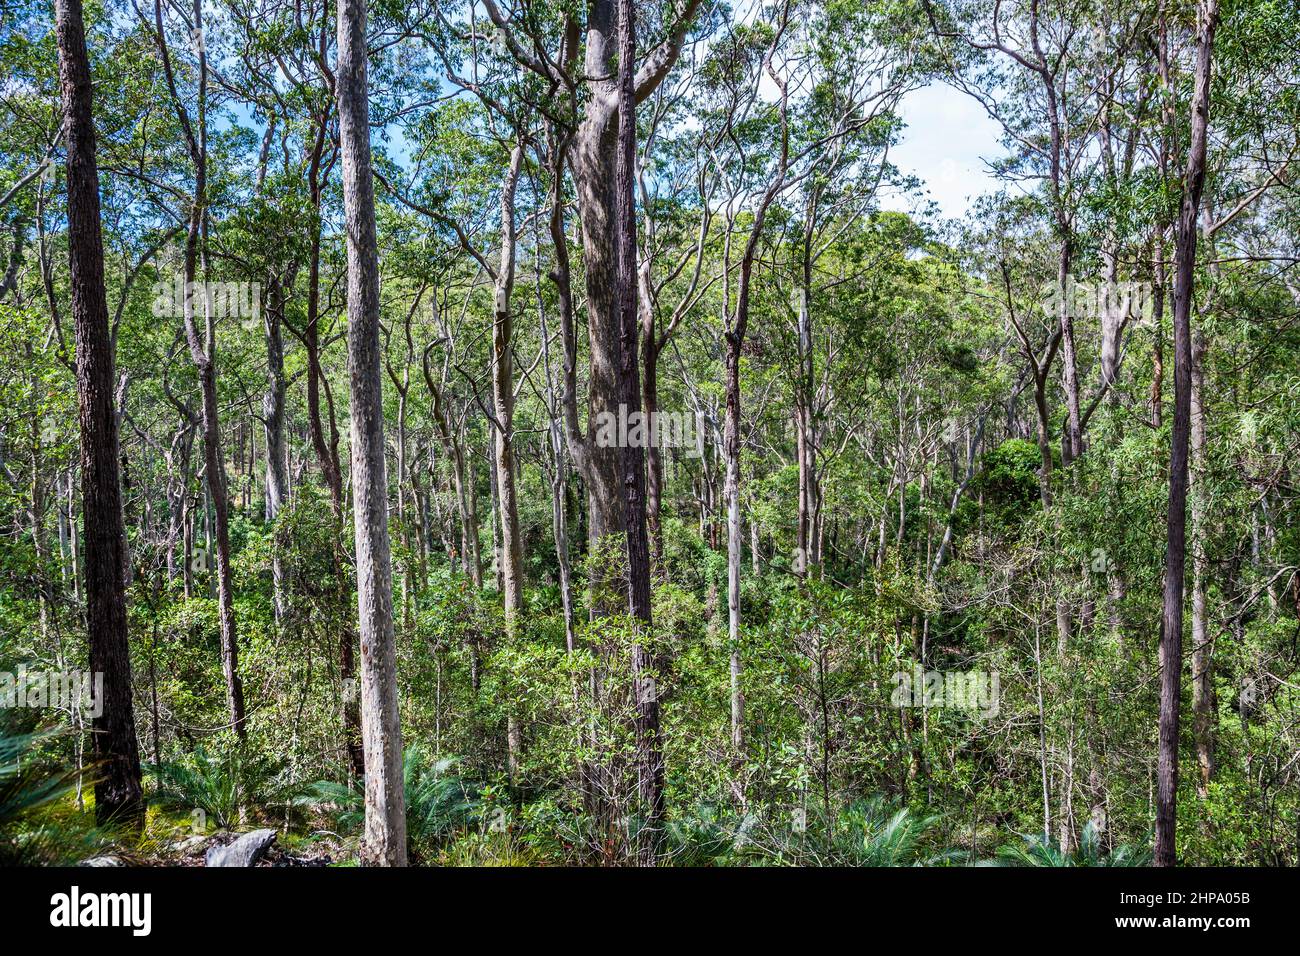 tall moist forest with spotted gums, cabbage tree palms and ferns at Murramarang National Park, on the South Coast of New South Wales, Australia Stock Photo